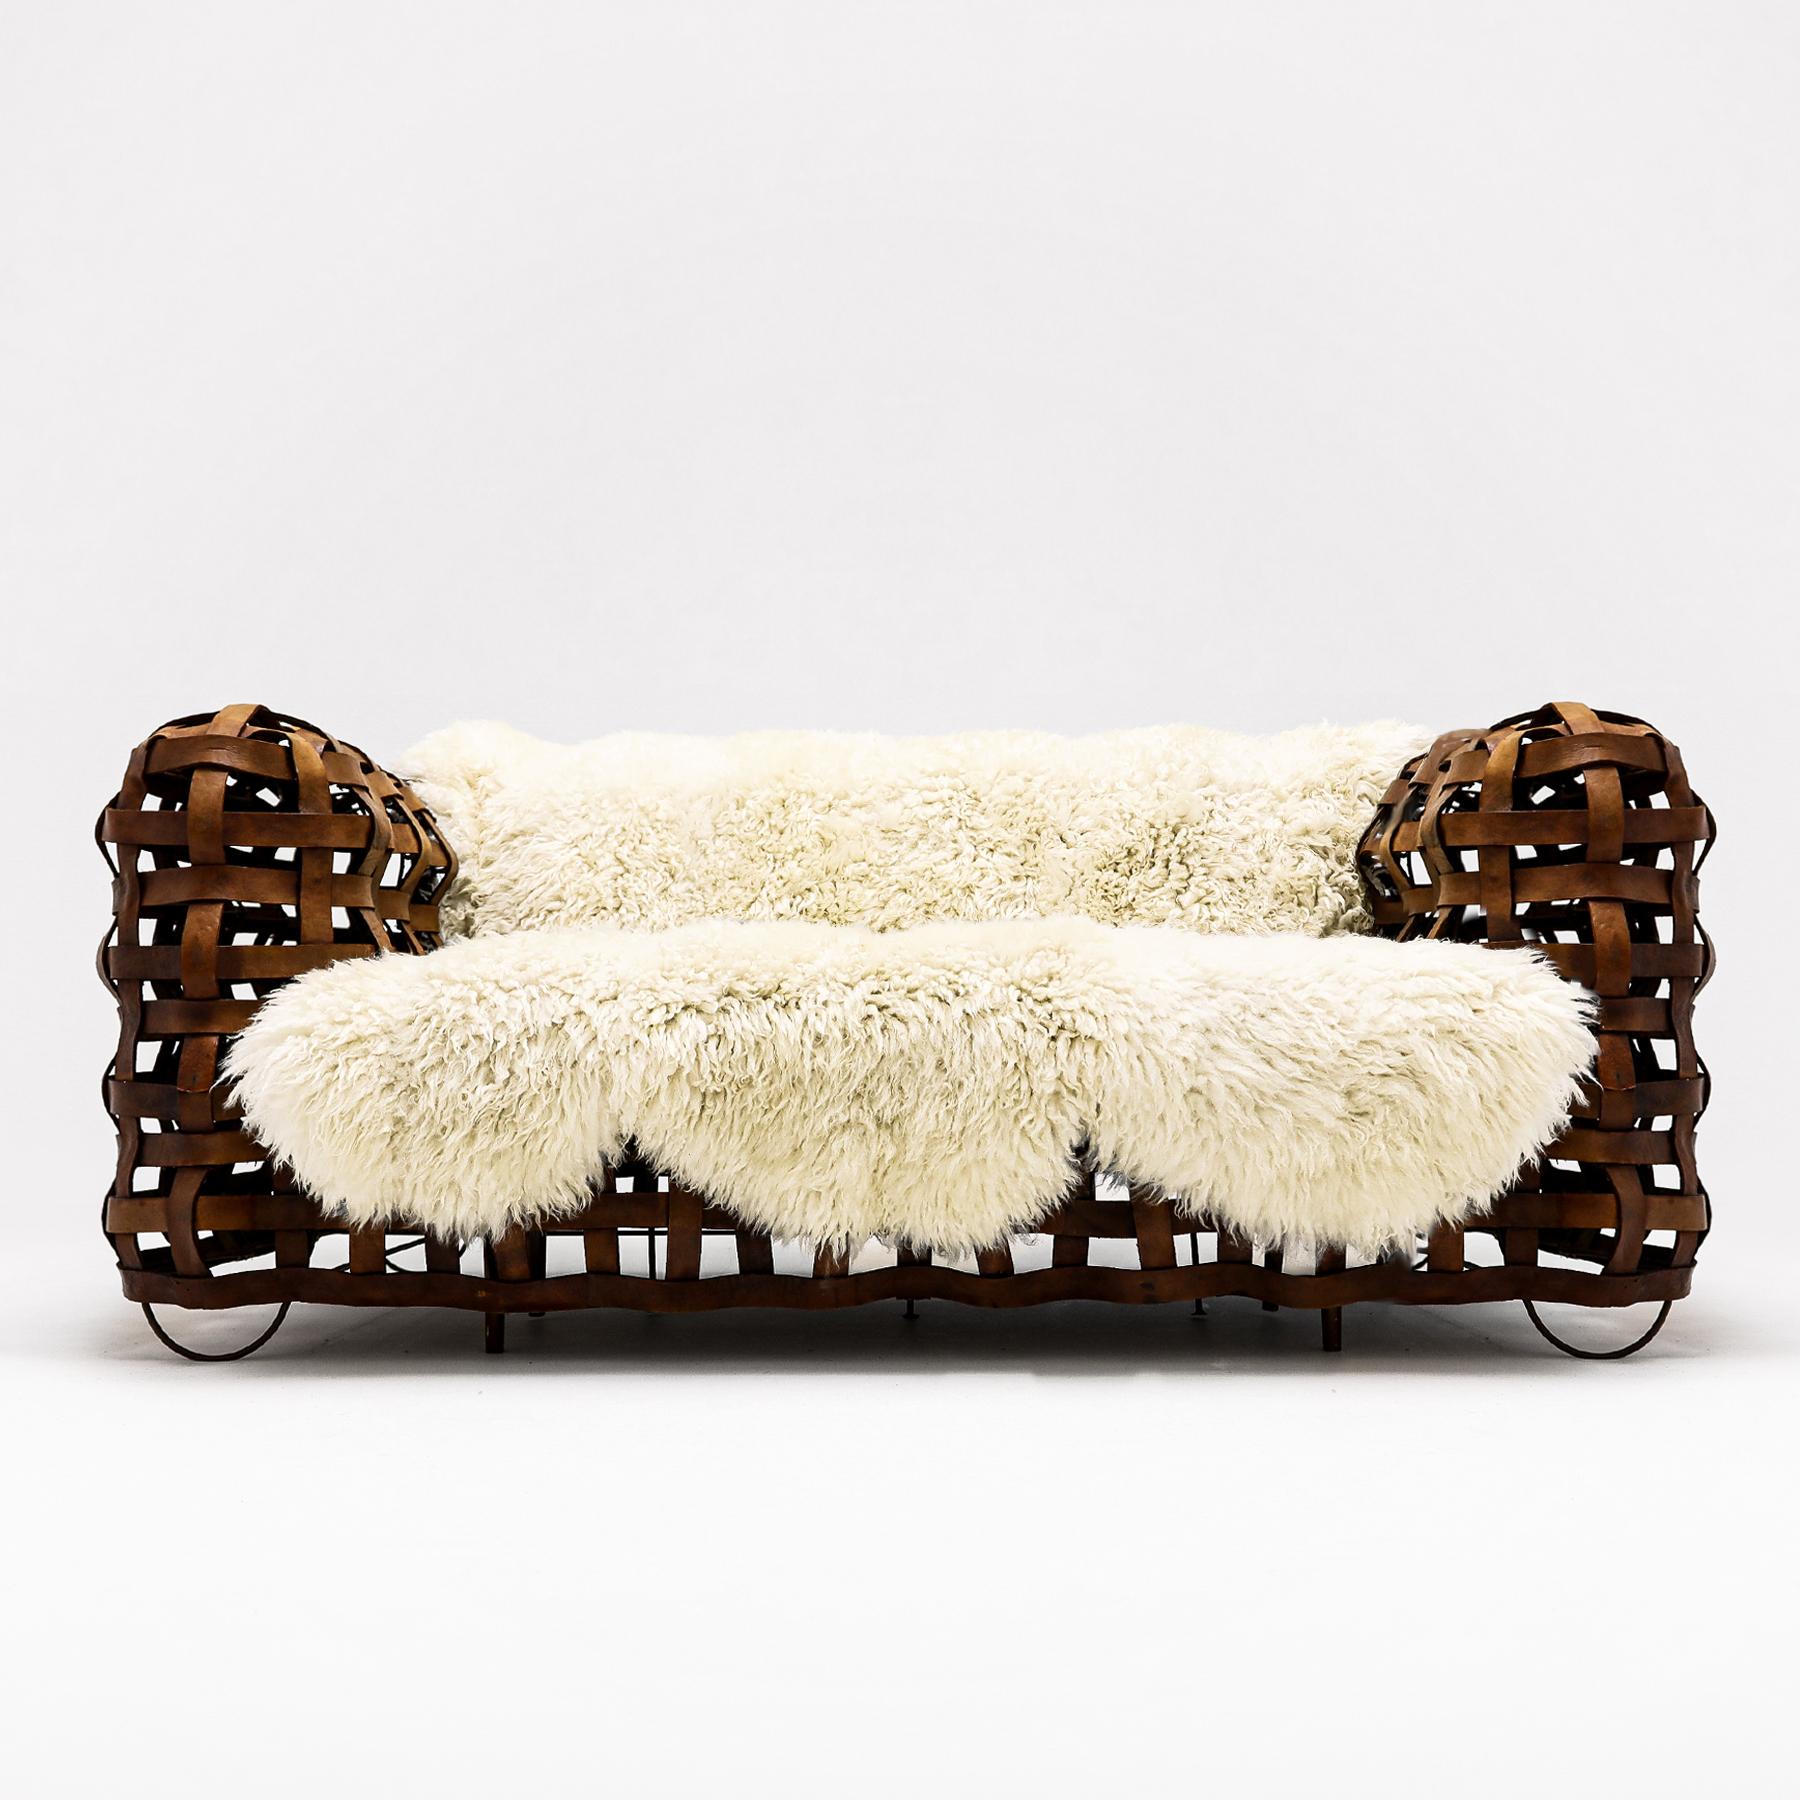 An extraordinary hand crafted Vintage French leather strap sofa with upholstered bench seat and bespoke sheepskin throw.

This is an extremely unusual and beautifully designed hand crafted sofa constructed from leather straps over a welded wire